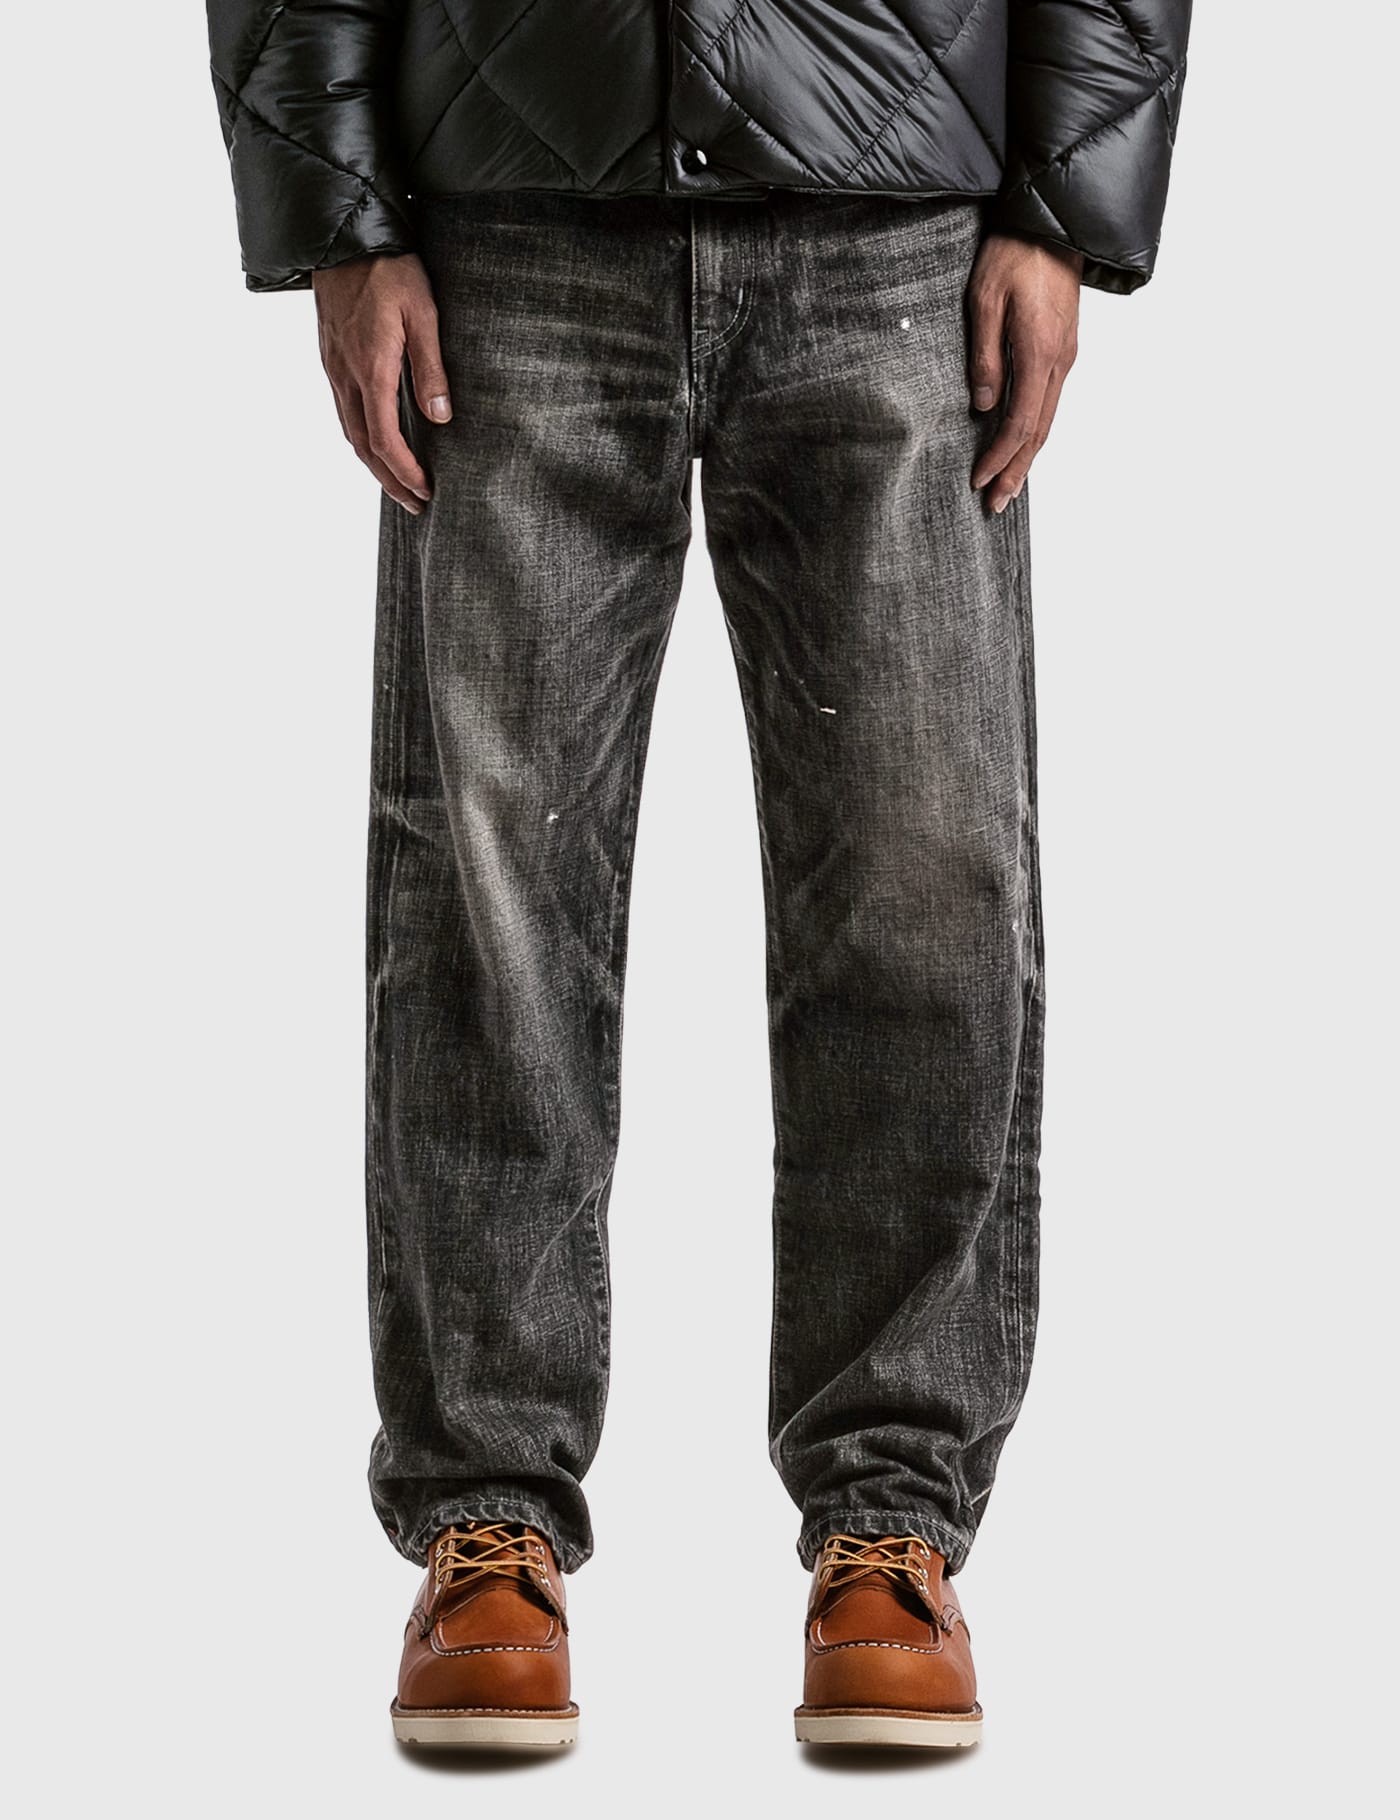 NEIGHBORHOOD - Washed D.P Basic Jeans | HBX - Globally Curated 